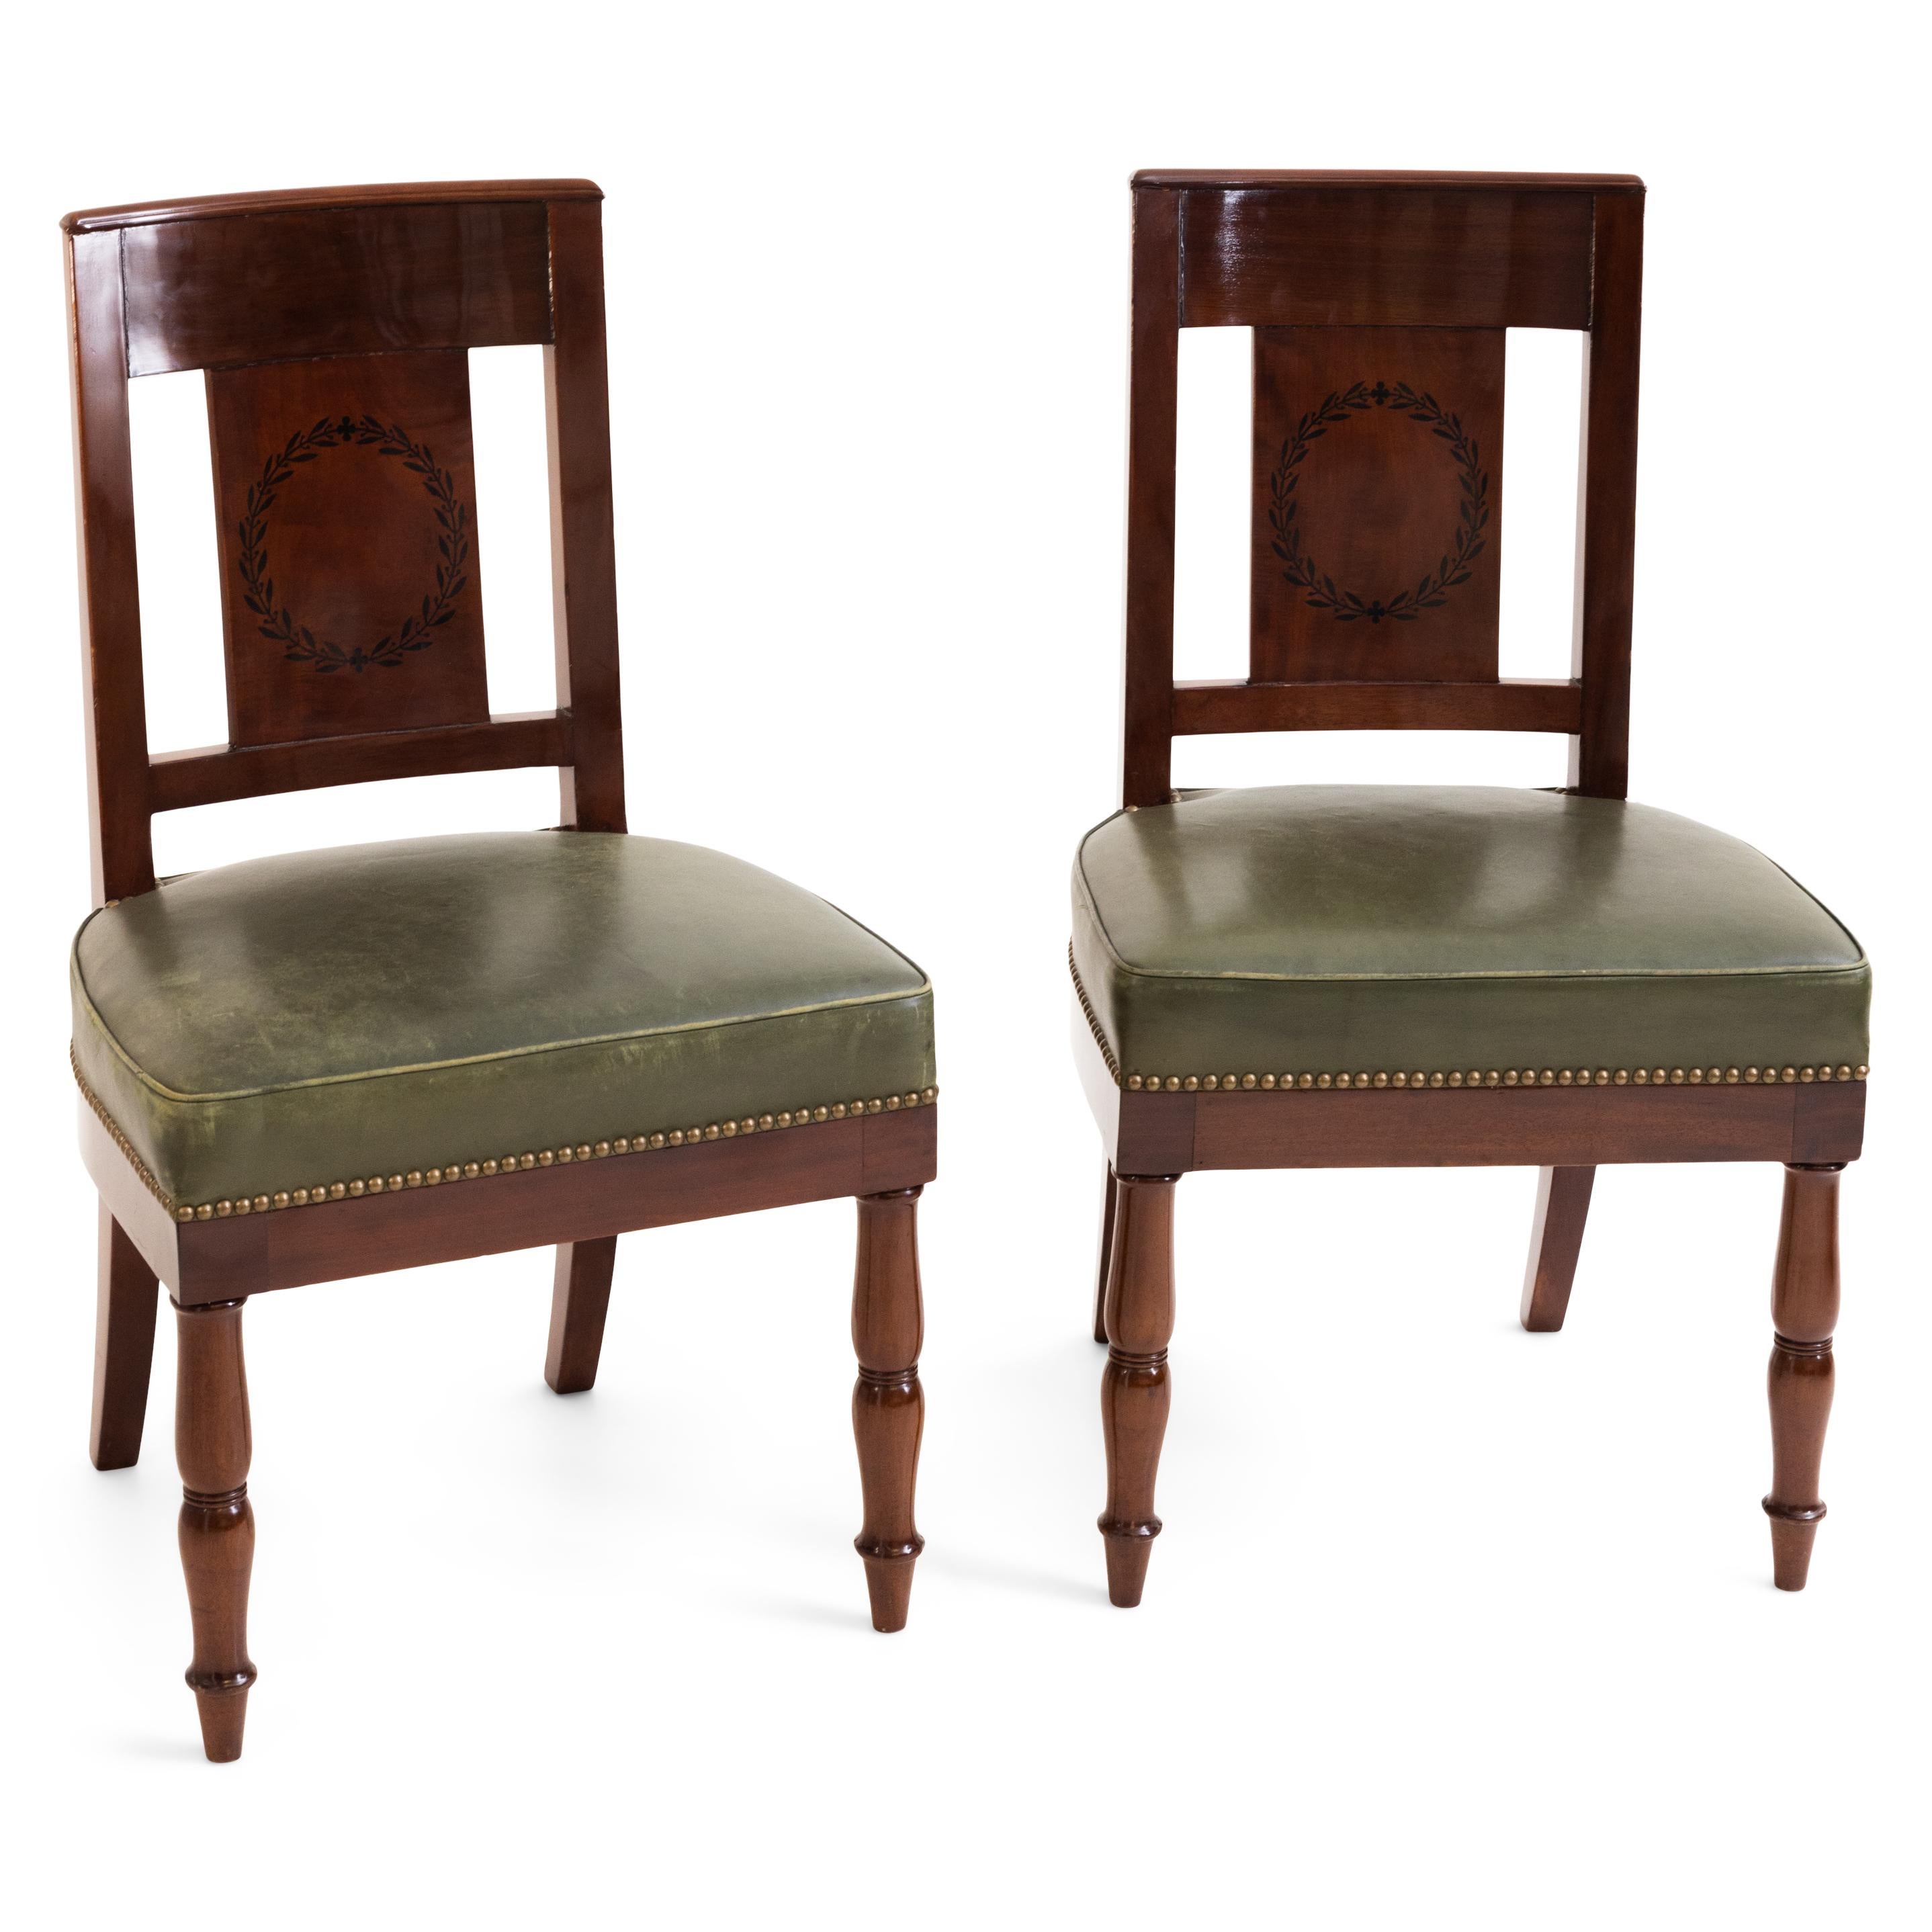 Pair of mahogany chairs circa 1810 on balustered front legs and slightly flared back legs. The backs each display a laurel wreath. Stamped Jacob D, R. Meslee.